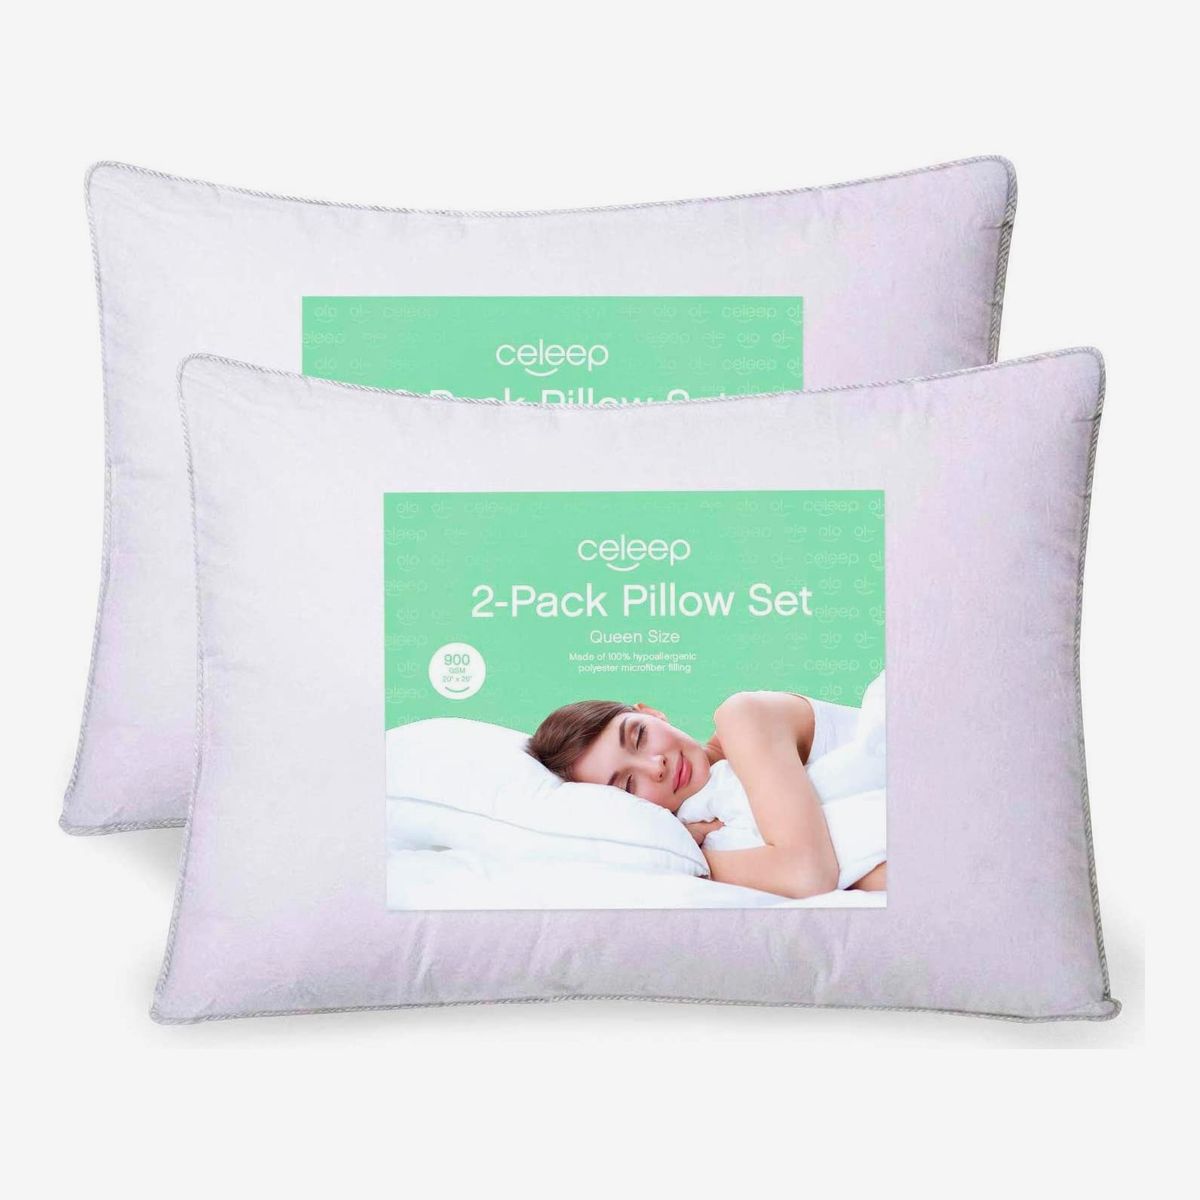 thin pillows for sleeping